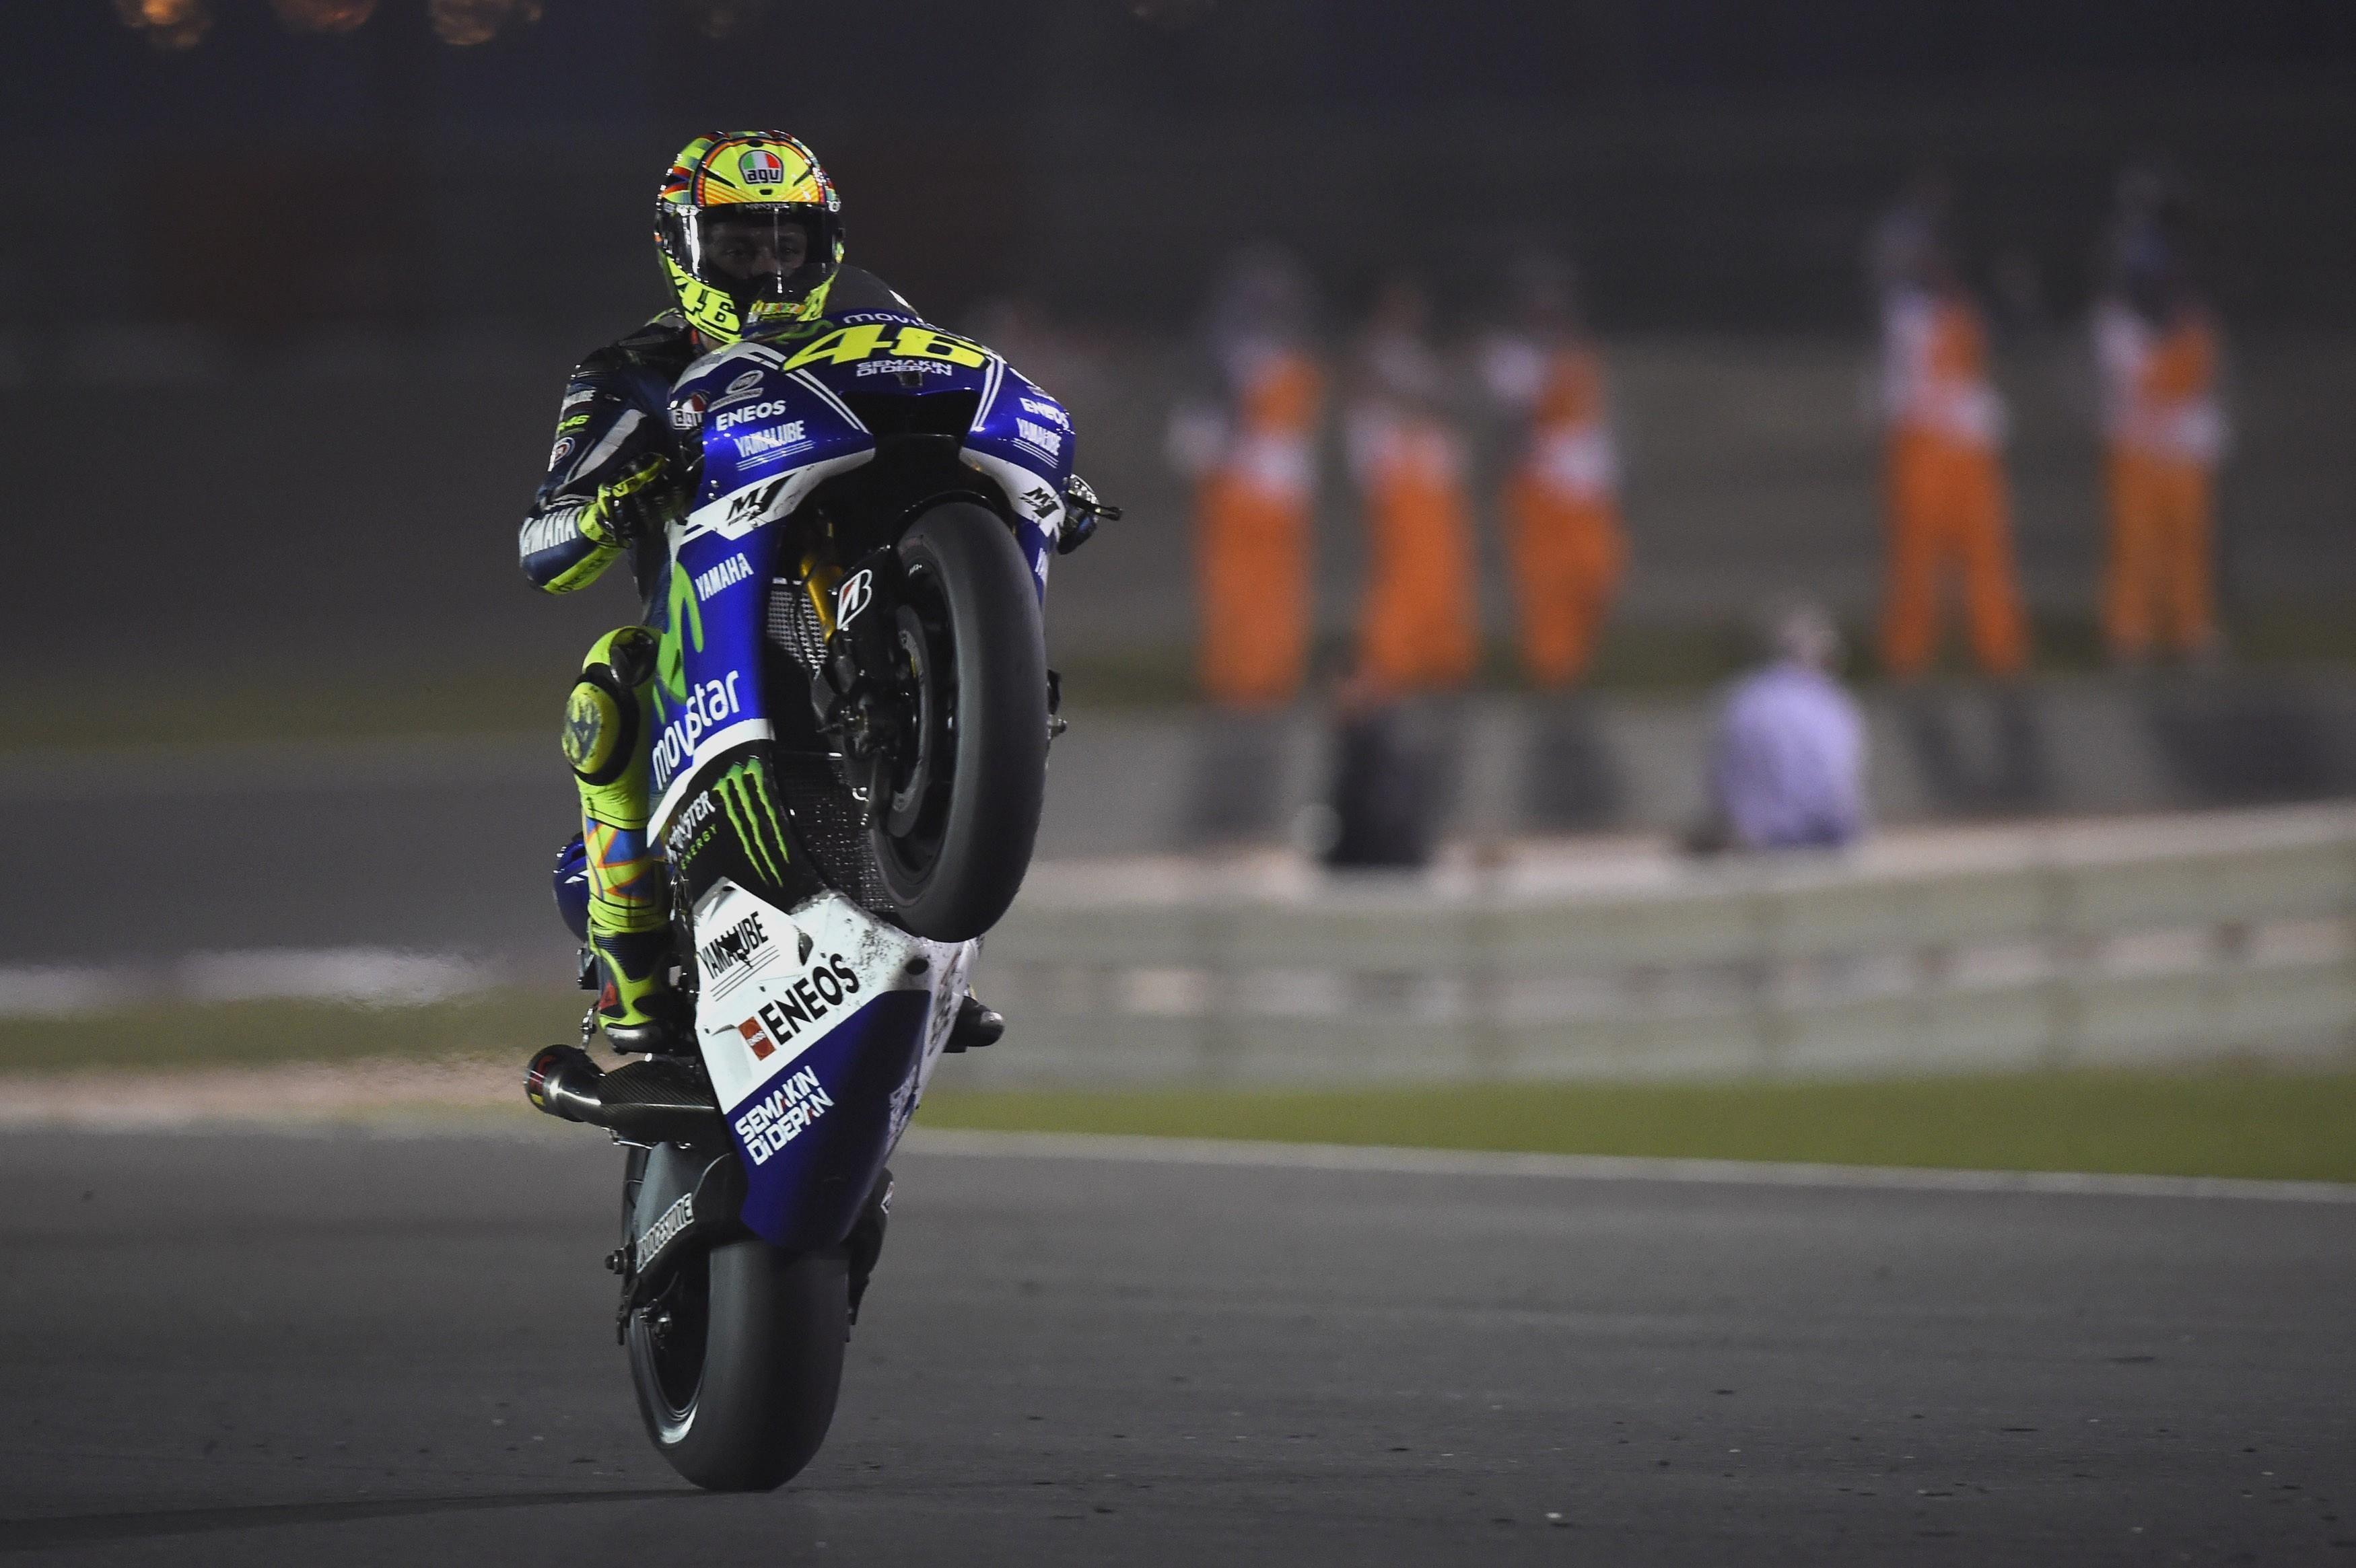 Wallpapers Valentino Rossi Group with 47 items.